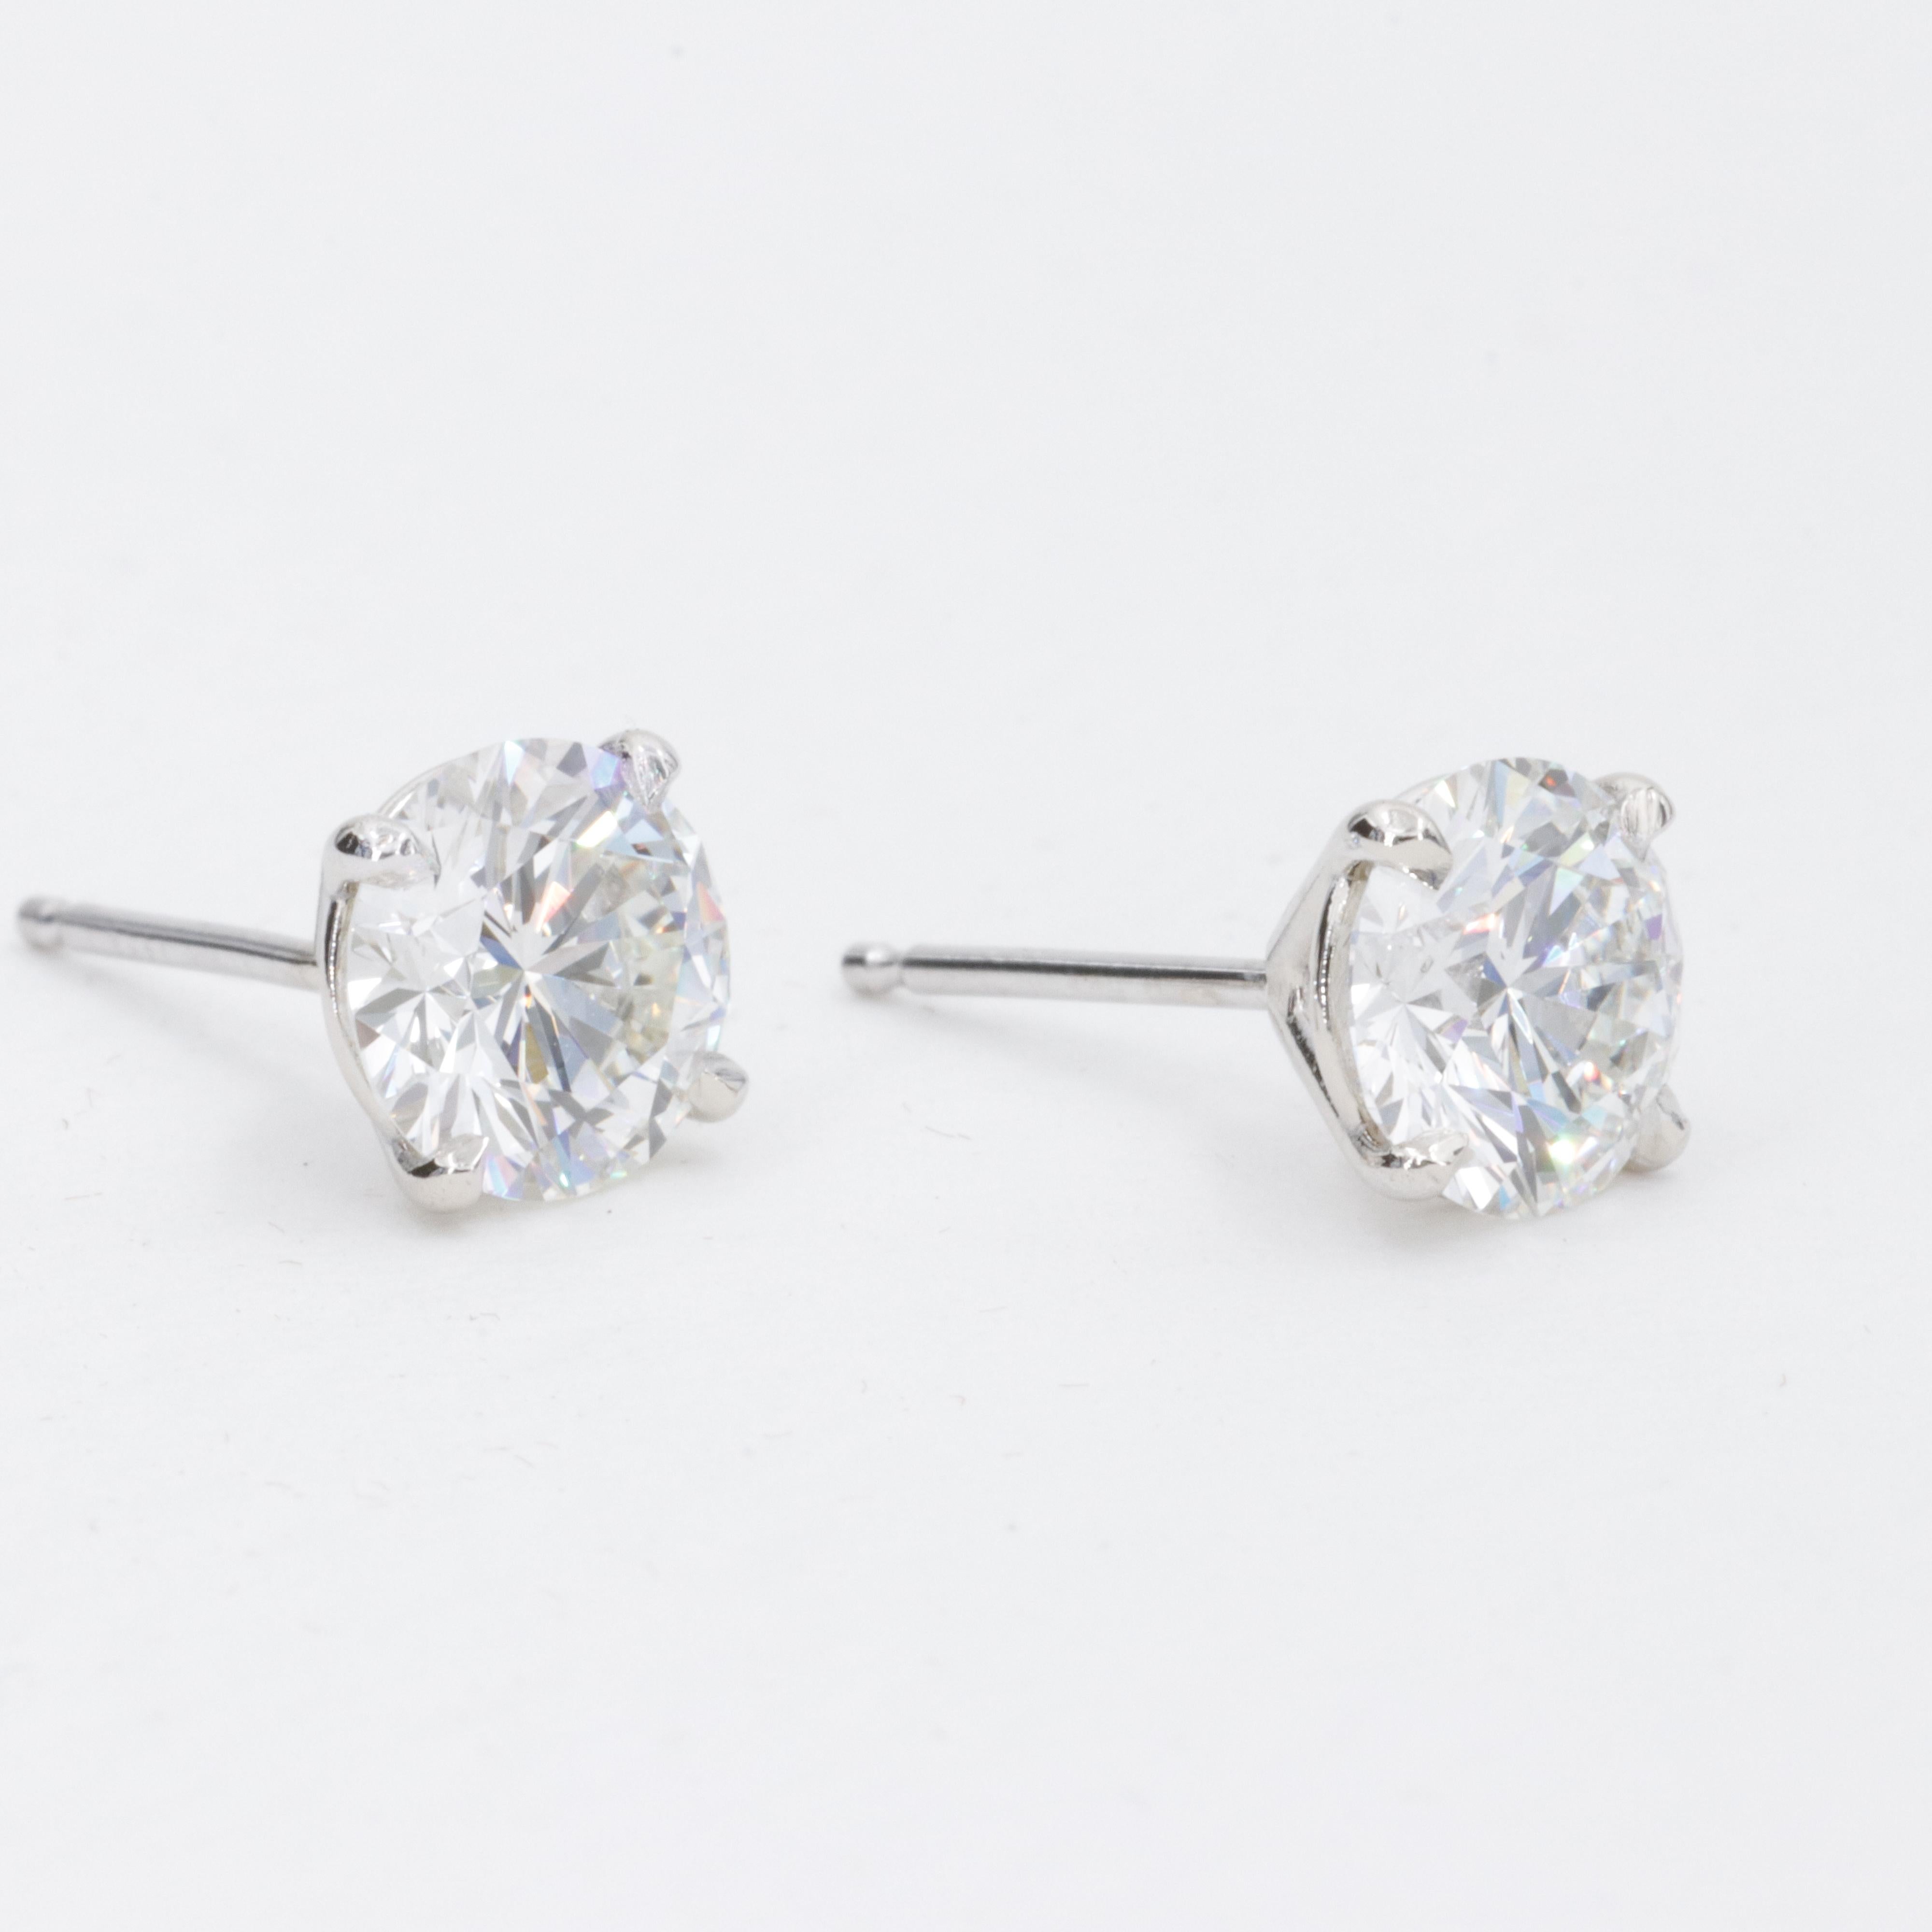 Modern 2.04 Carat GIA Diamond Stud Earrings Fine Quality in White Gold 4 Prong Settings For Sale